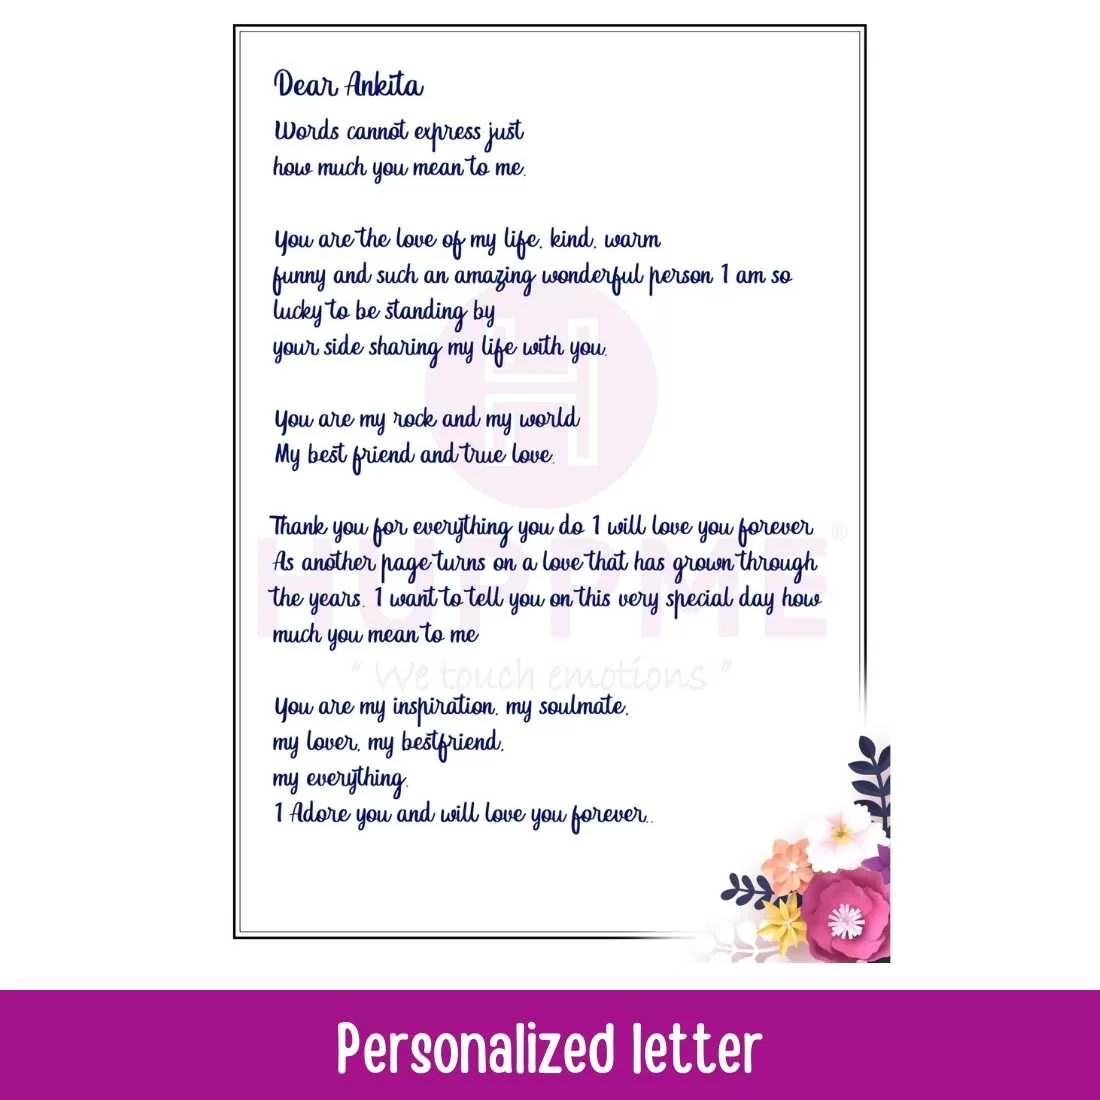 Personalized letter